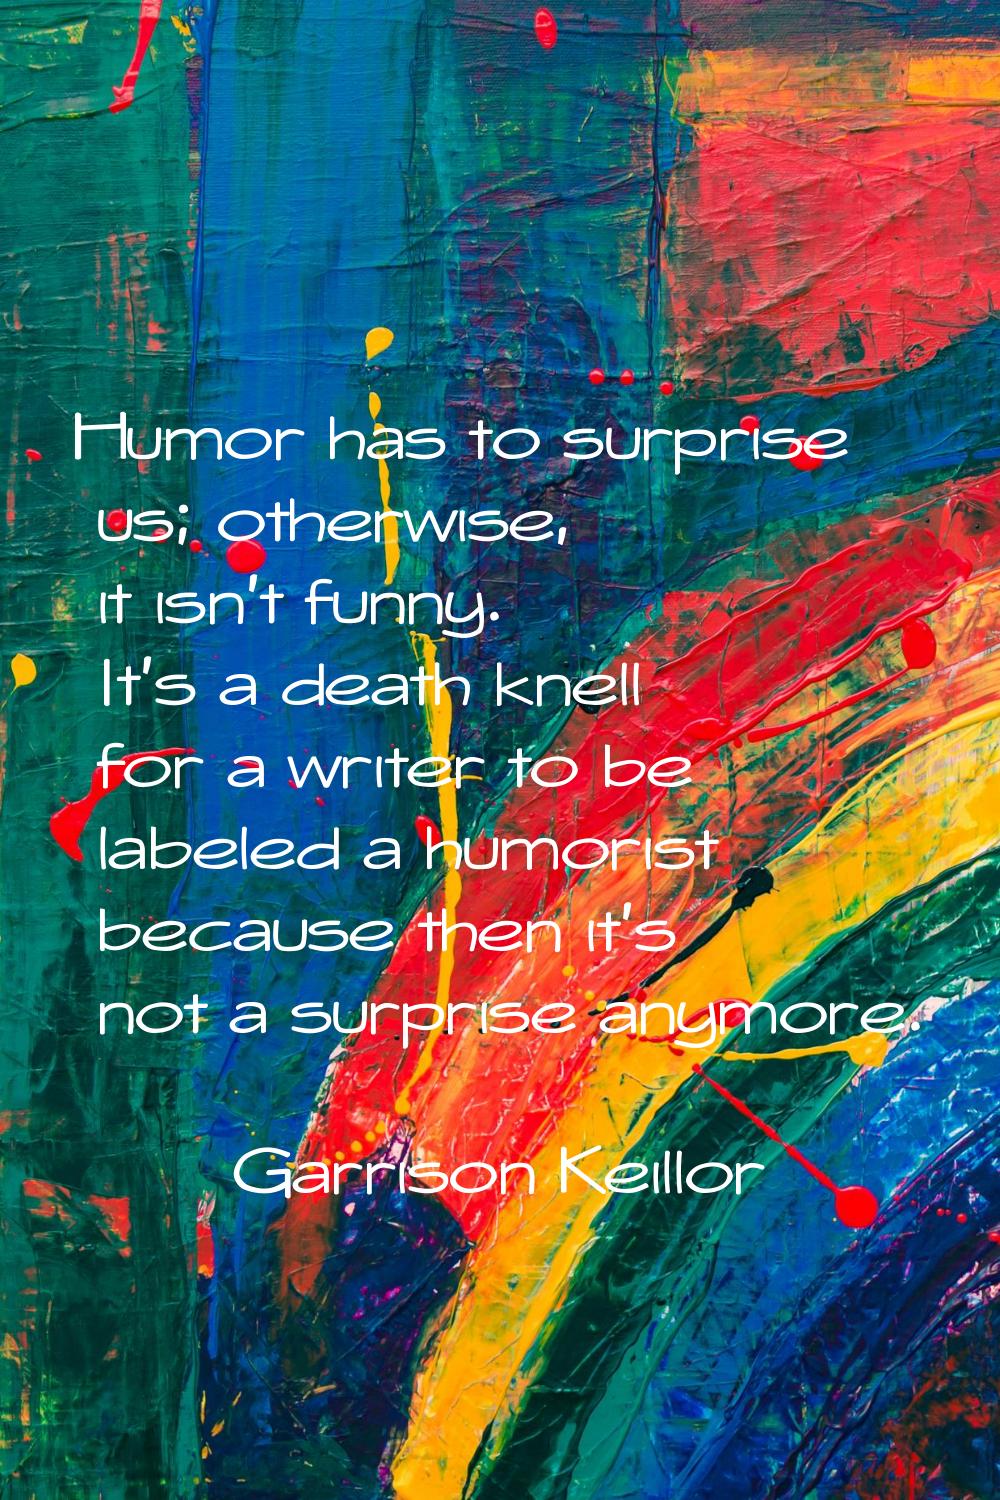 Humor has to surprise us; otherwise, it isn't funny. It's a death knell for a writer to be labeled 